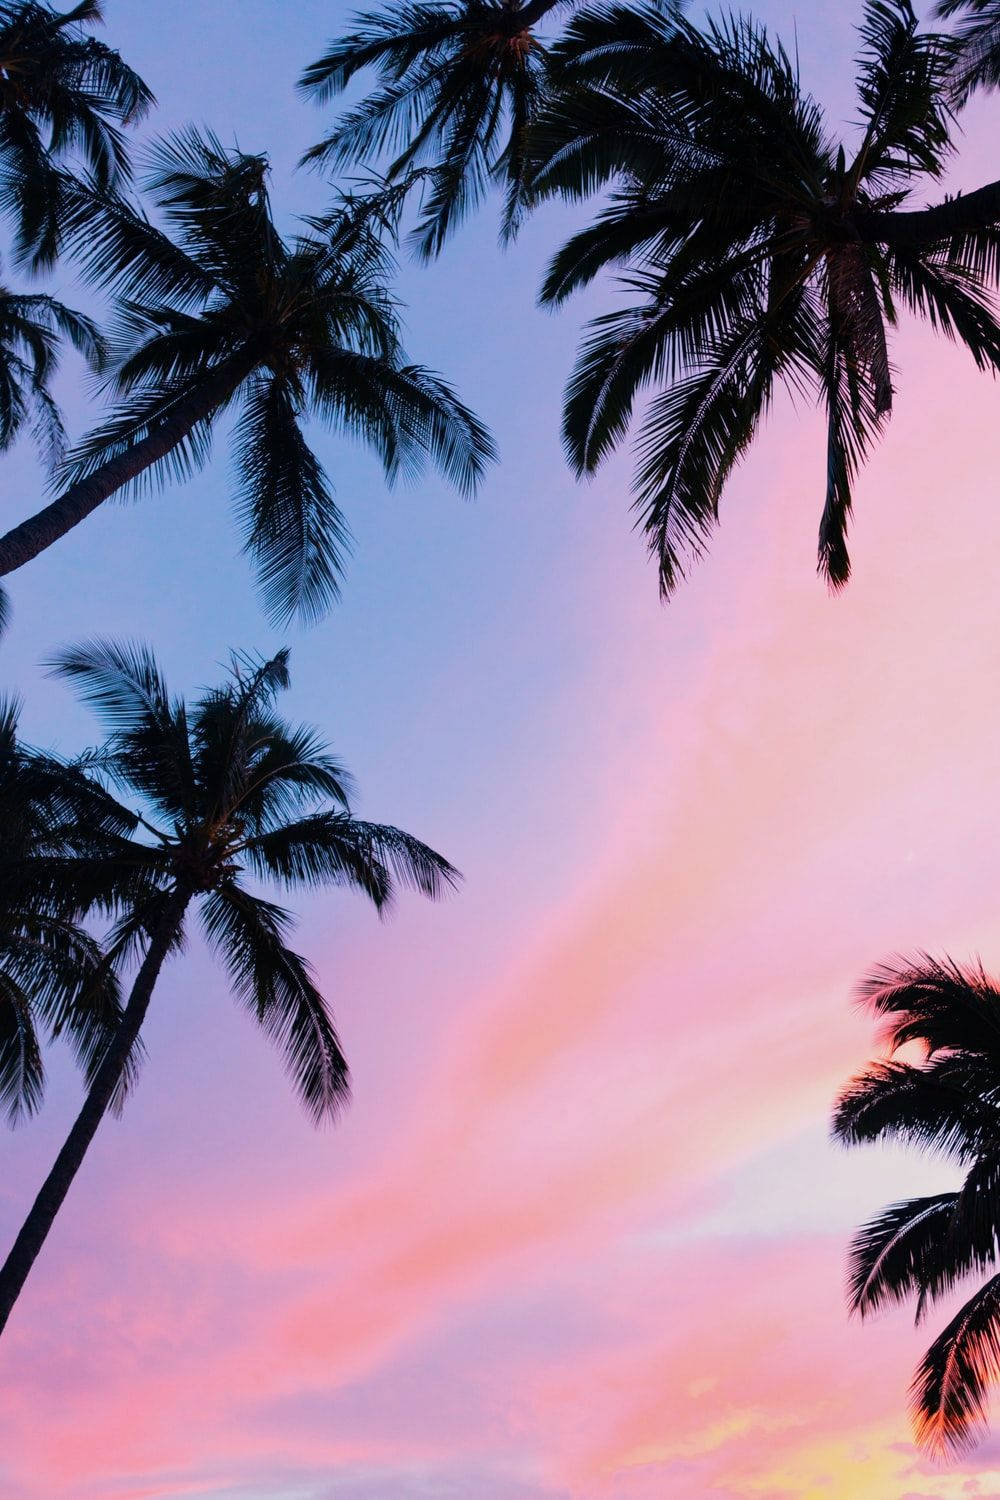 Palm Trees And Pink Skies Cool PFP Wallpaper